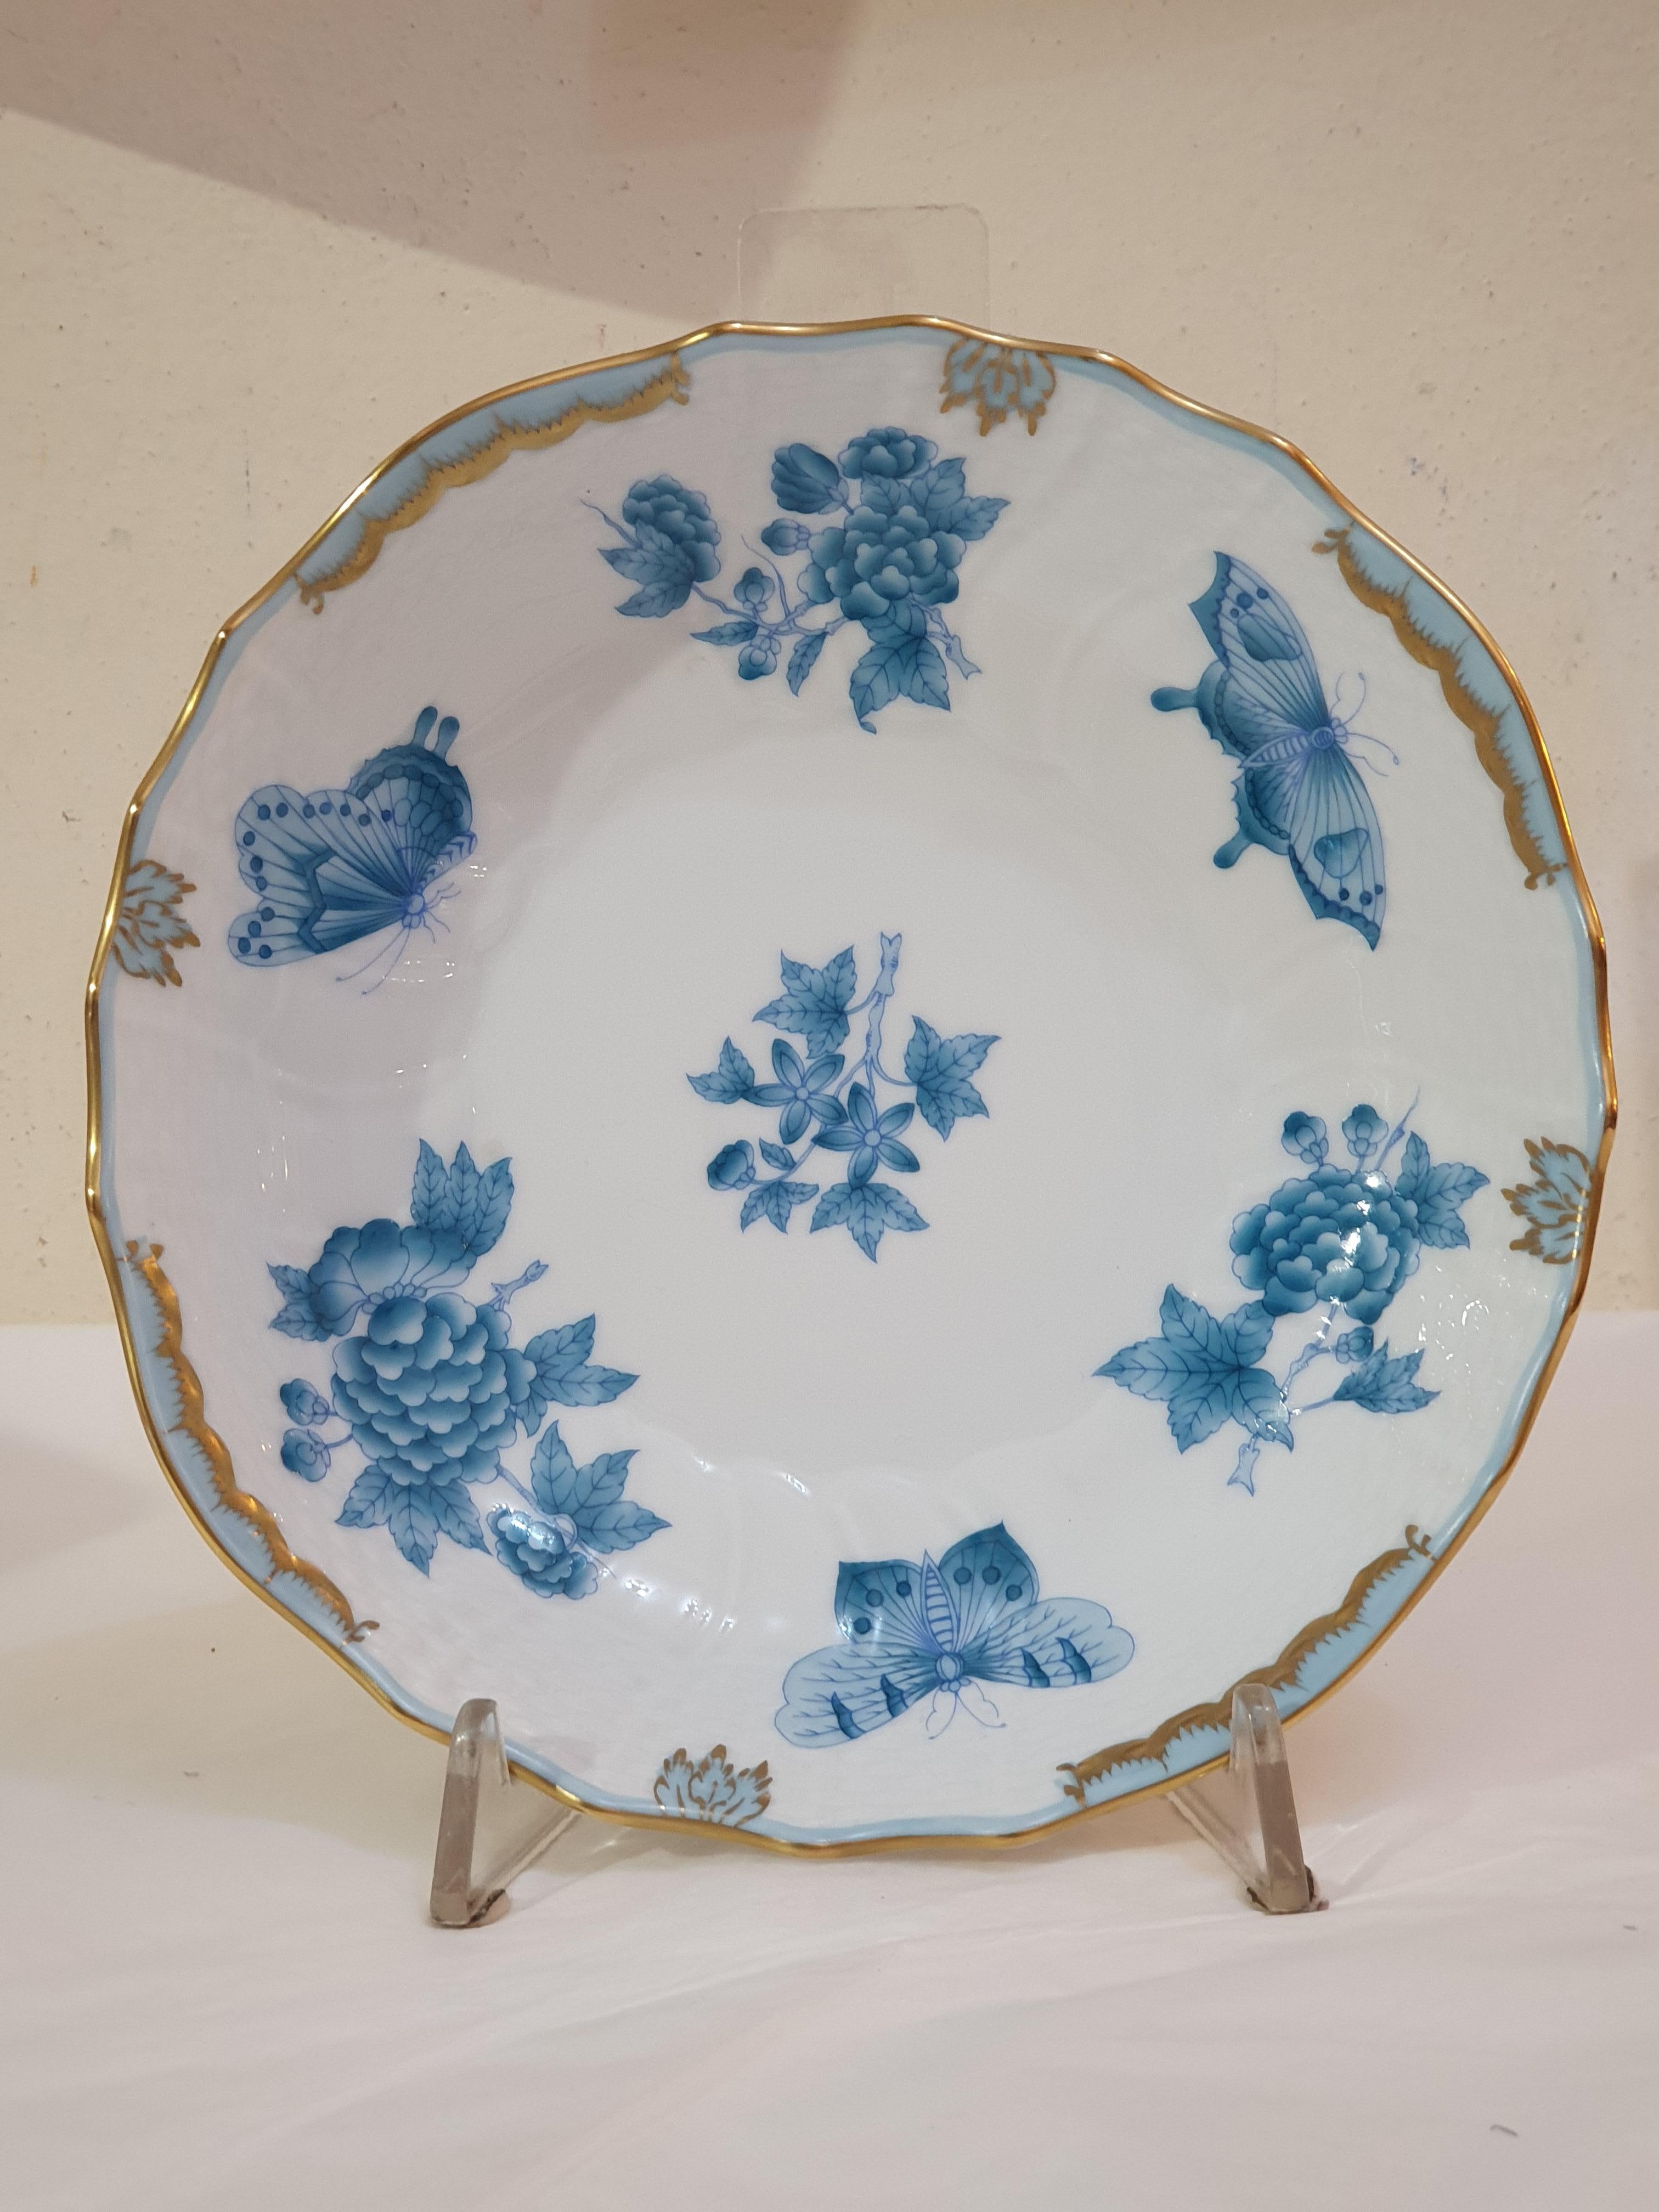 Stylish compotier in Hungarian porcelain hand painted with flowers and butterflies decoration, turquoise color.
The Victoria decor is one of the most important of Herend since it was chosen by the great Queen Victoria in 1851 during the universal